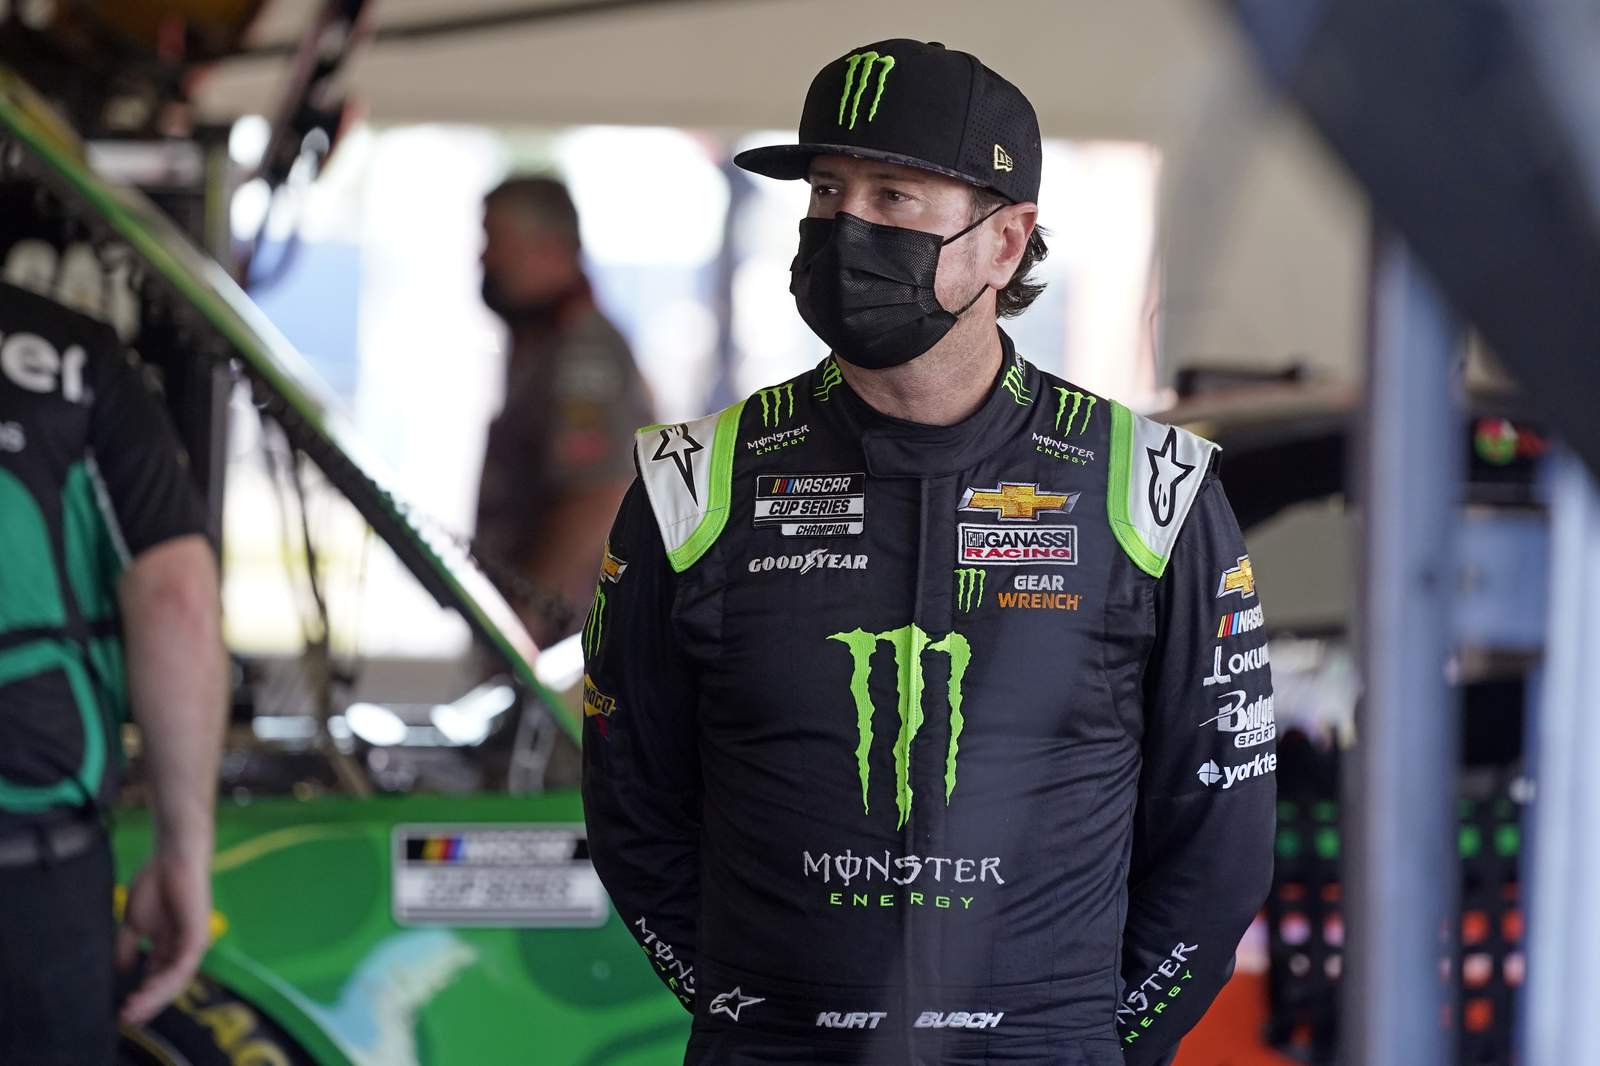 Ready to retire? Kurt Busch leaves NASCAR fans guessing